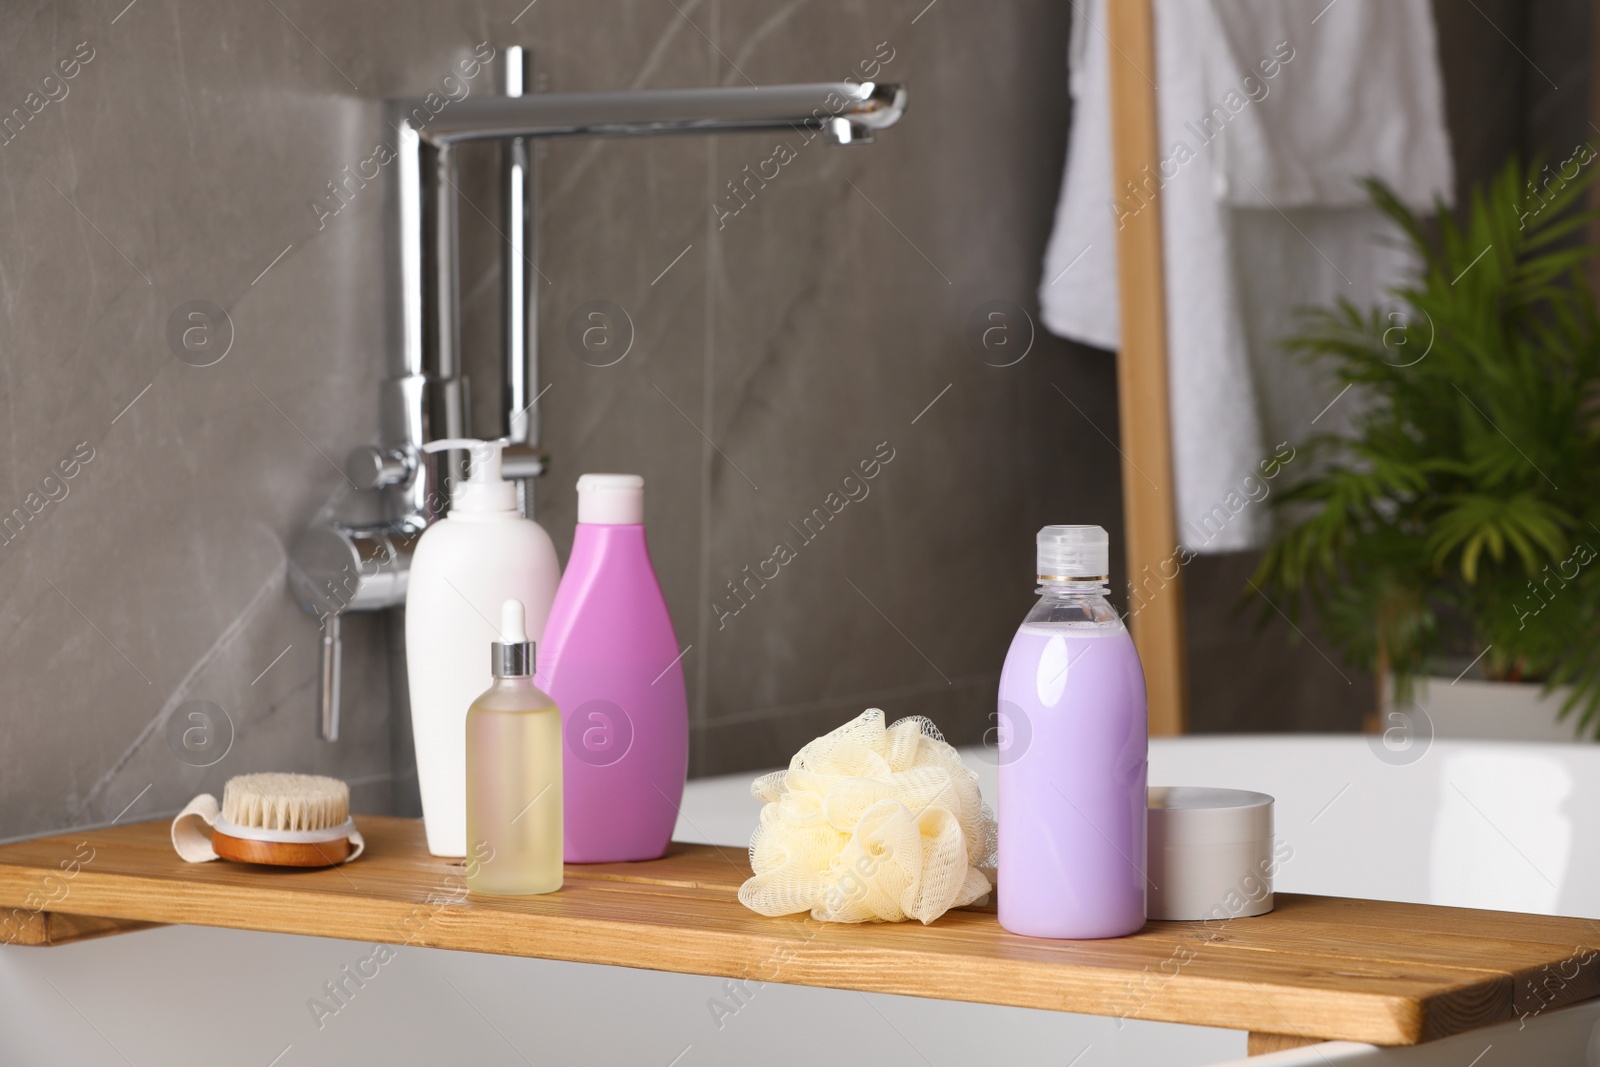 Photo of Wooden bath tray with shampoo, hair oil and other toiletries on tub indoors